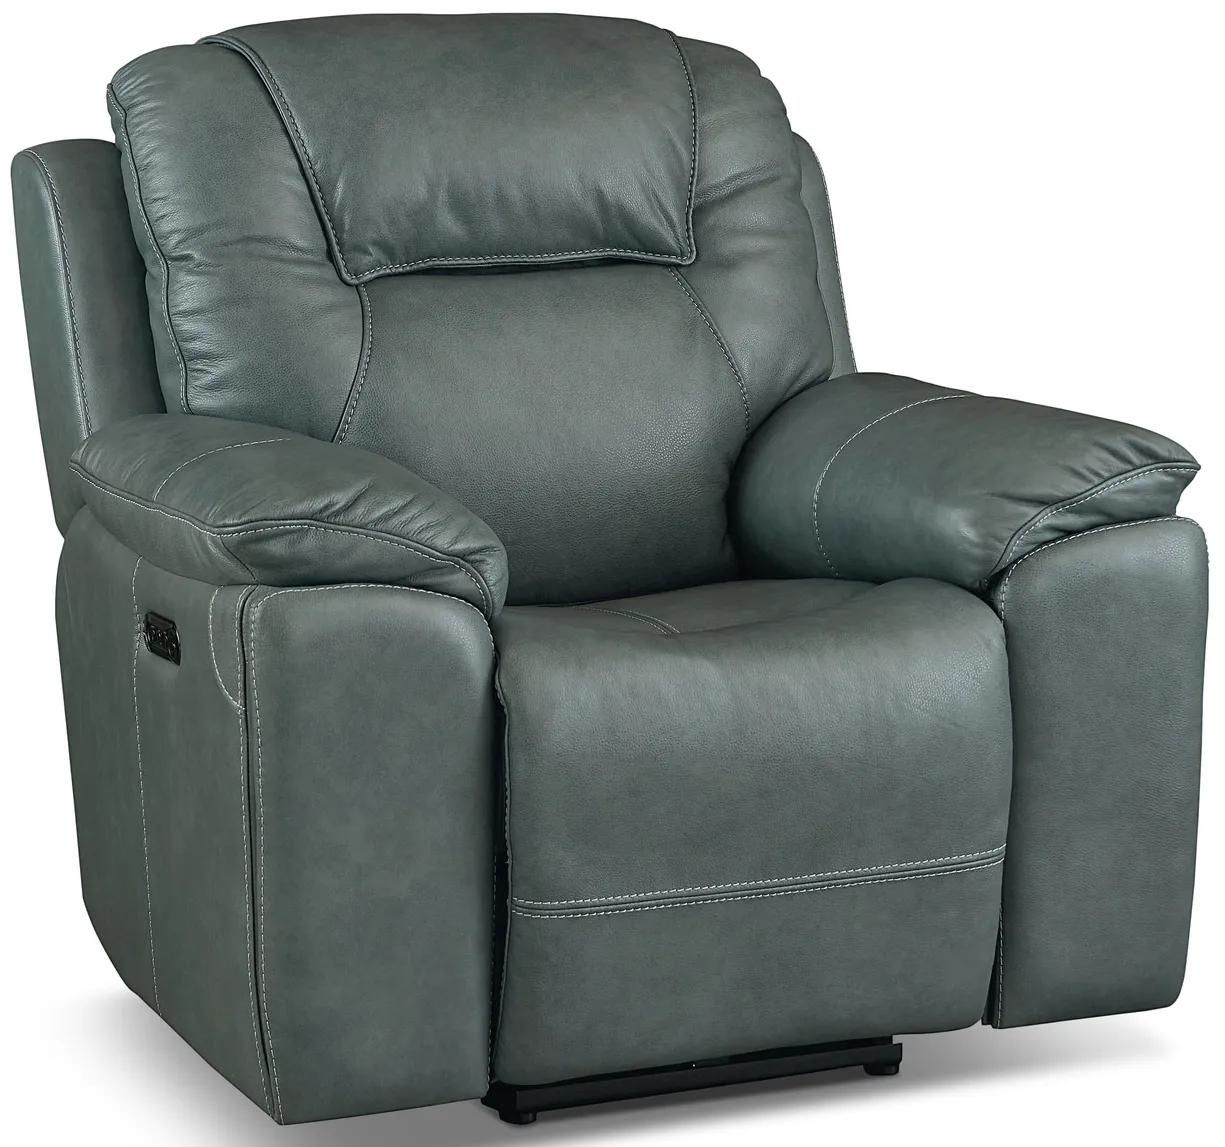 Chandler Leather Power Recliner